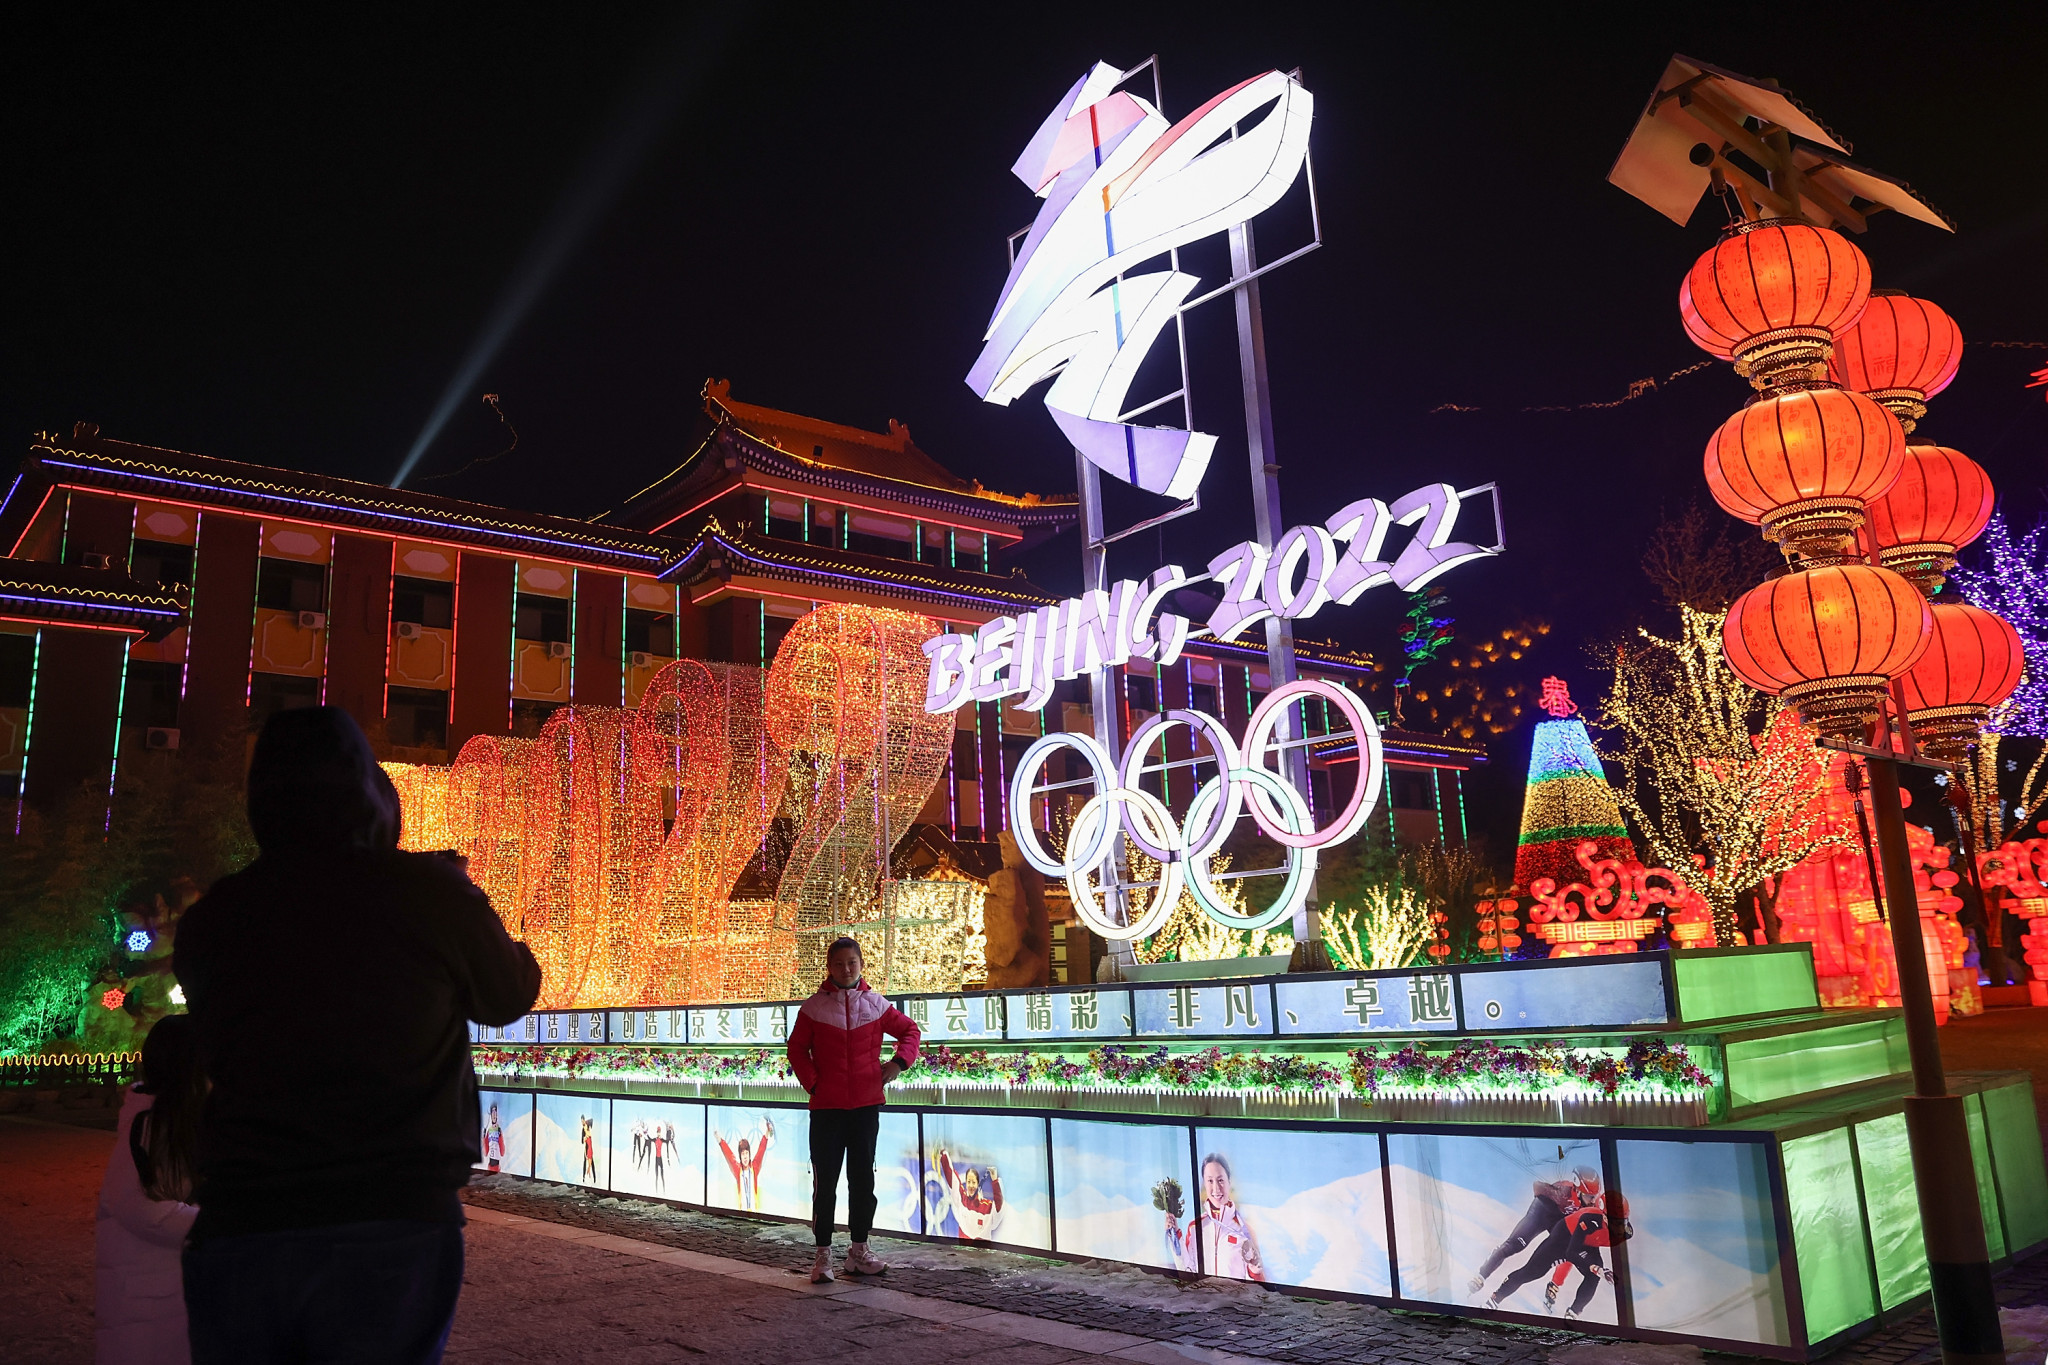 A coalition of campaigners are calling for a full boycott of the Beijing 2022 Olympics ©Getty Images